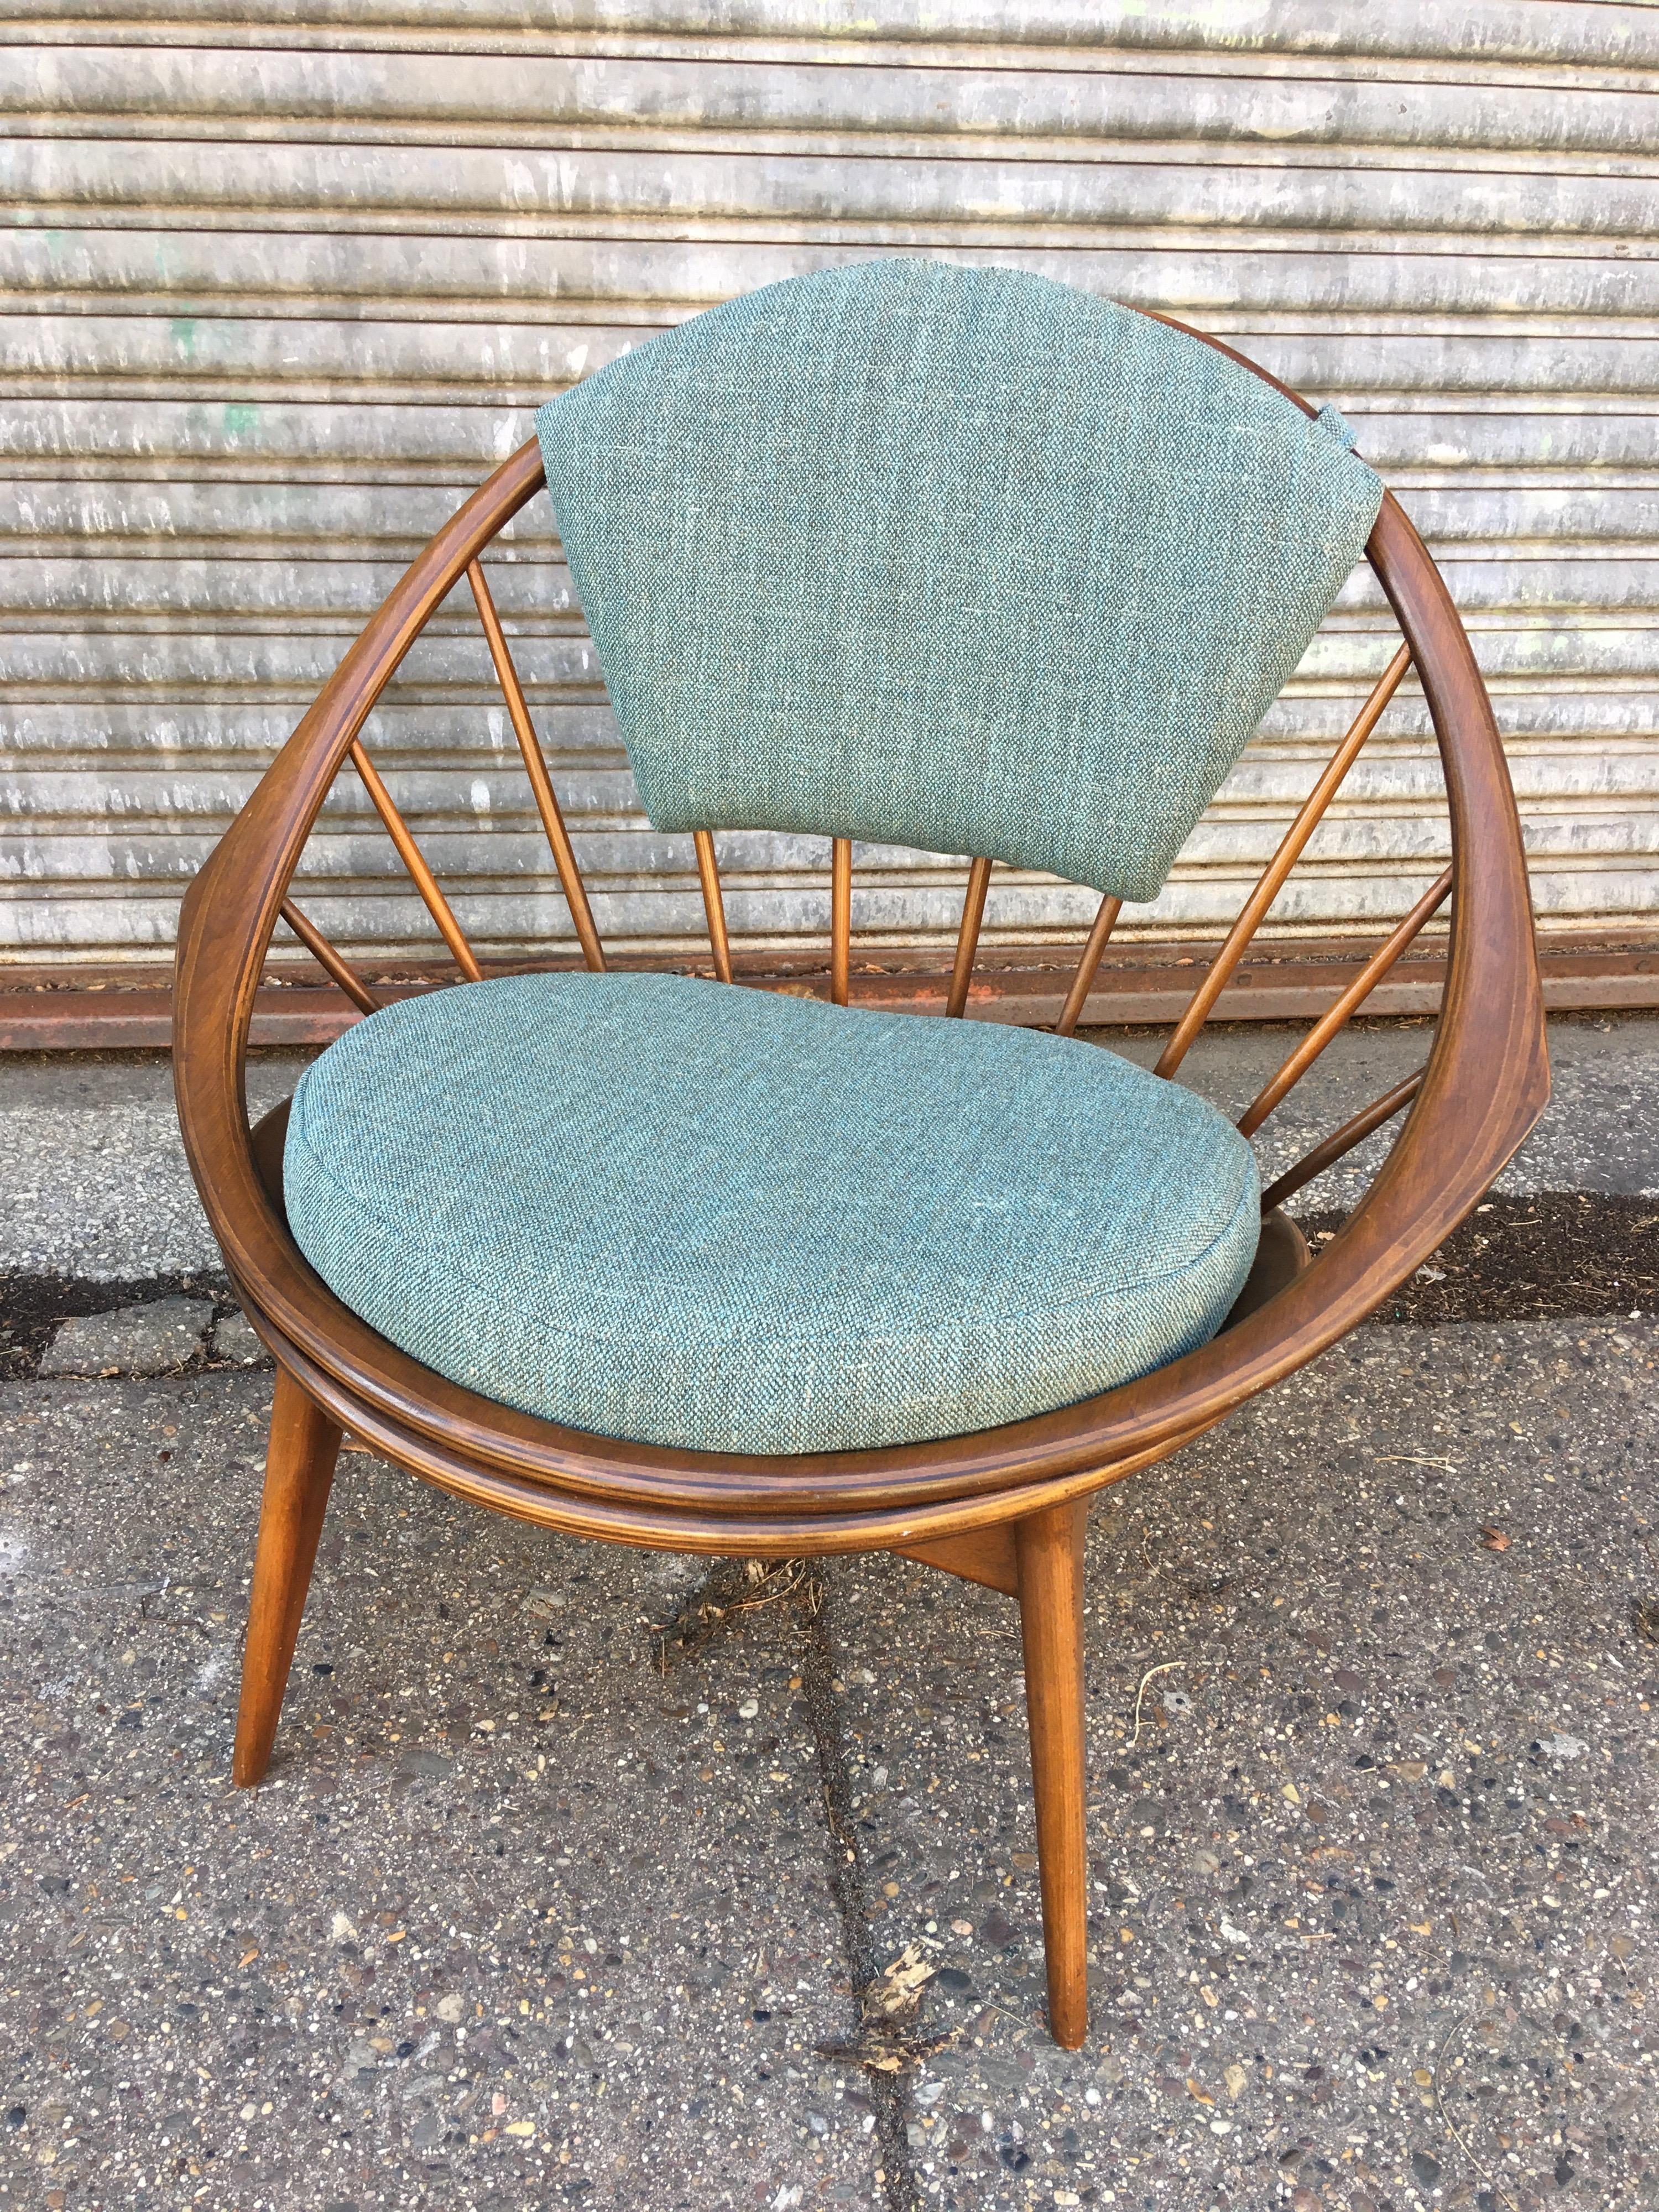 Ib Kofod Larsen for Selig Hoop or peacock chair. Walnut frame with spindle back that loops around with one continuous piece of laminated wood. Original wood finish looks very good! Newly upholstered and ready to go!